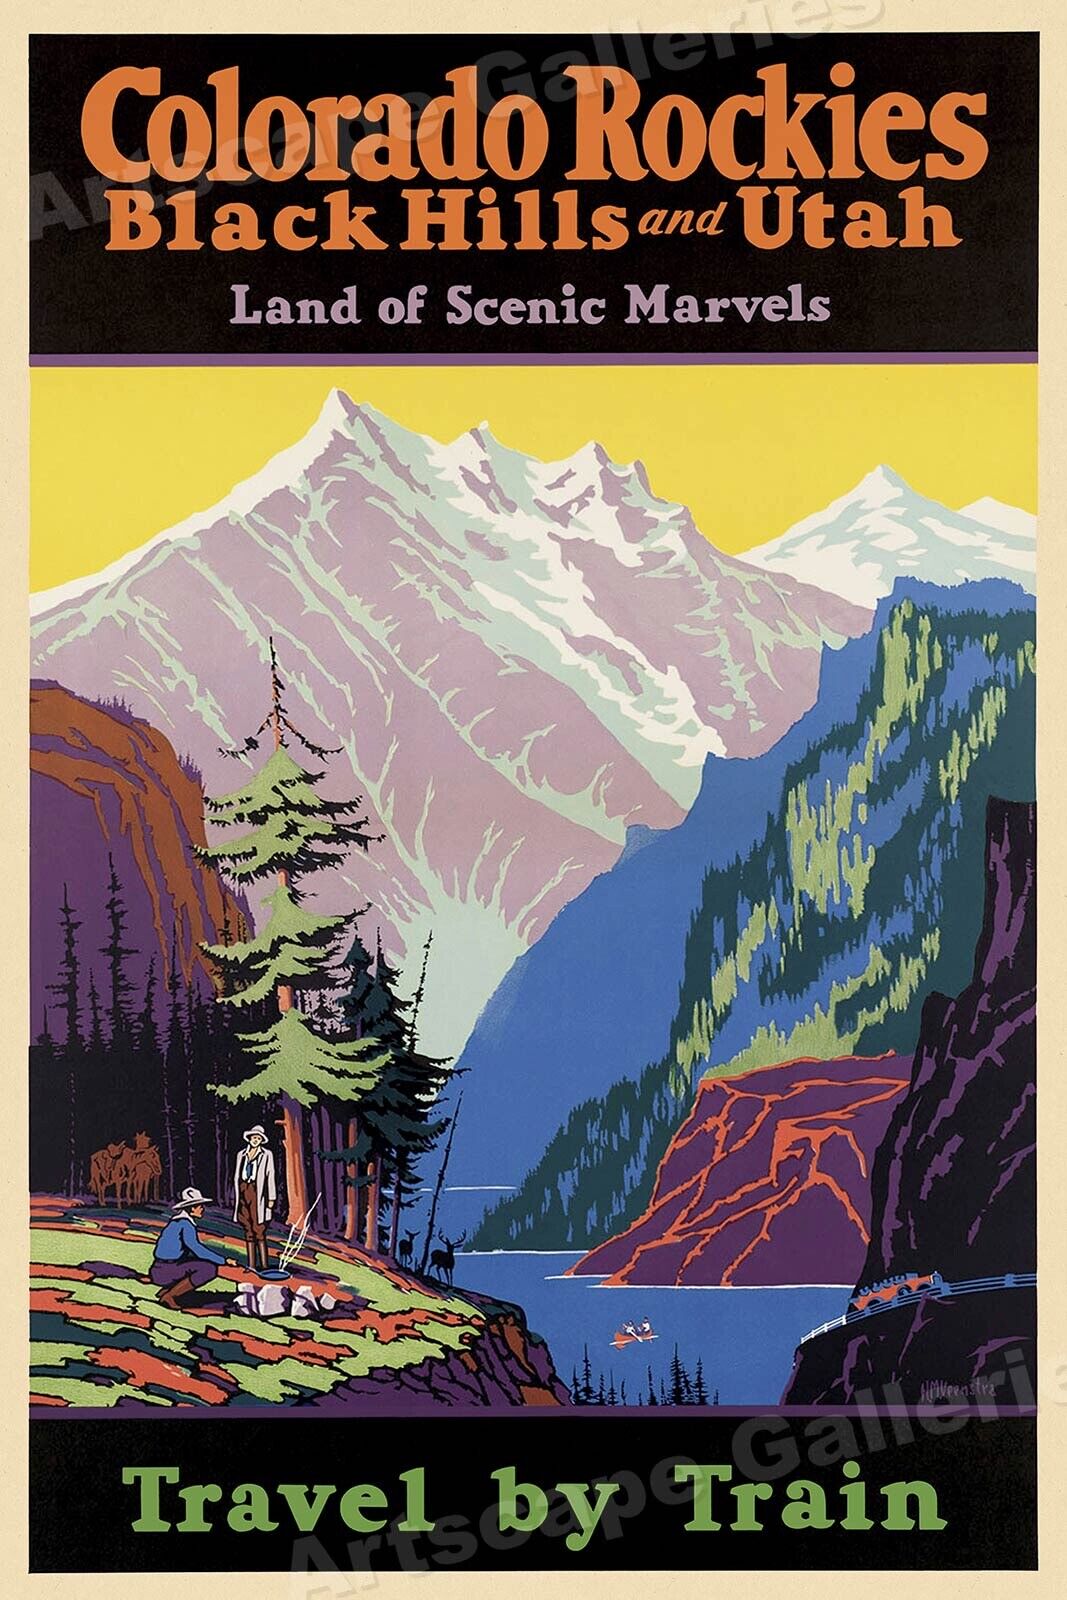 1920s Travel by Train Colorado Rockies Vintage Style Travel Poster - 16x24